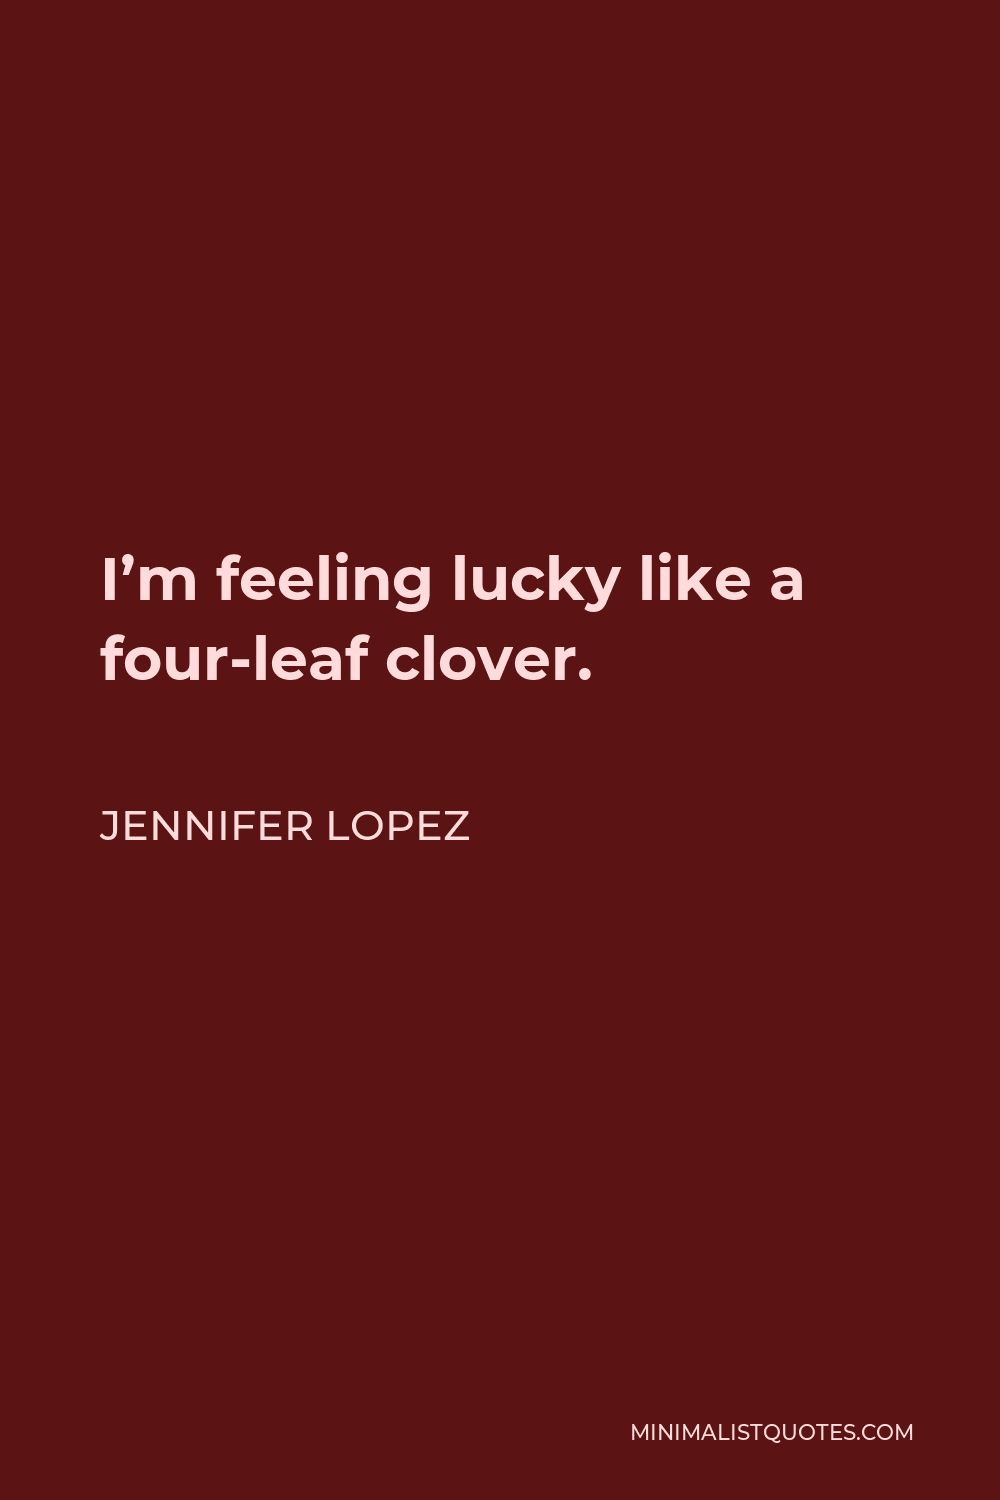 Jennifer Lopez Quote - I’m feeling lucky like a four-leaf clover.